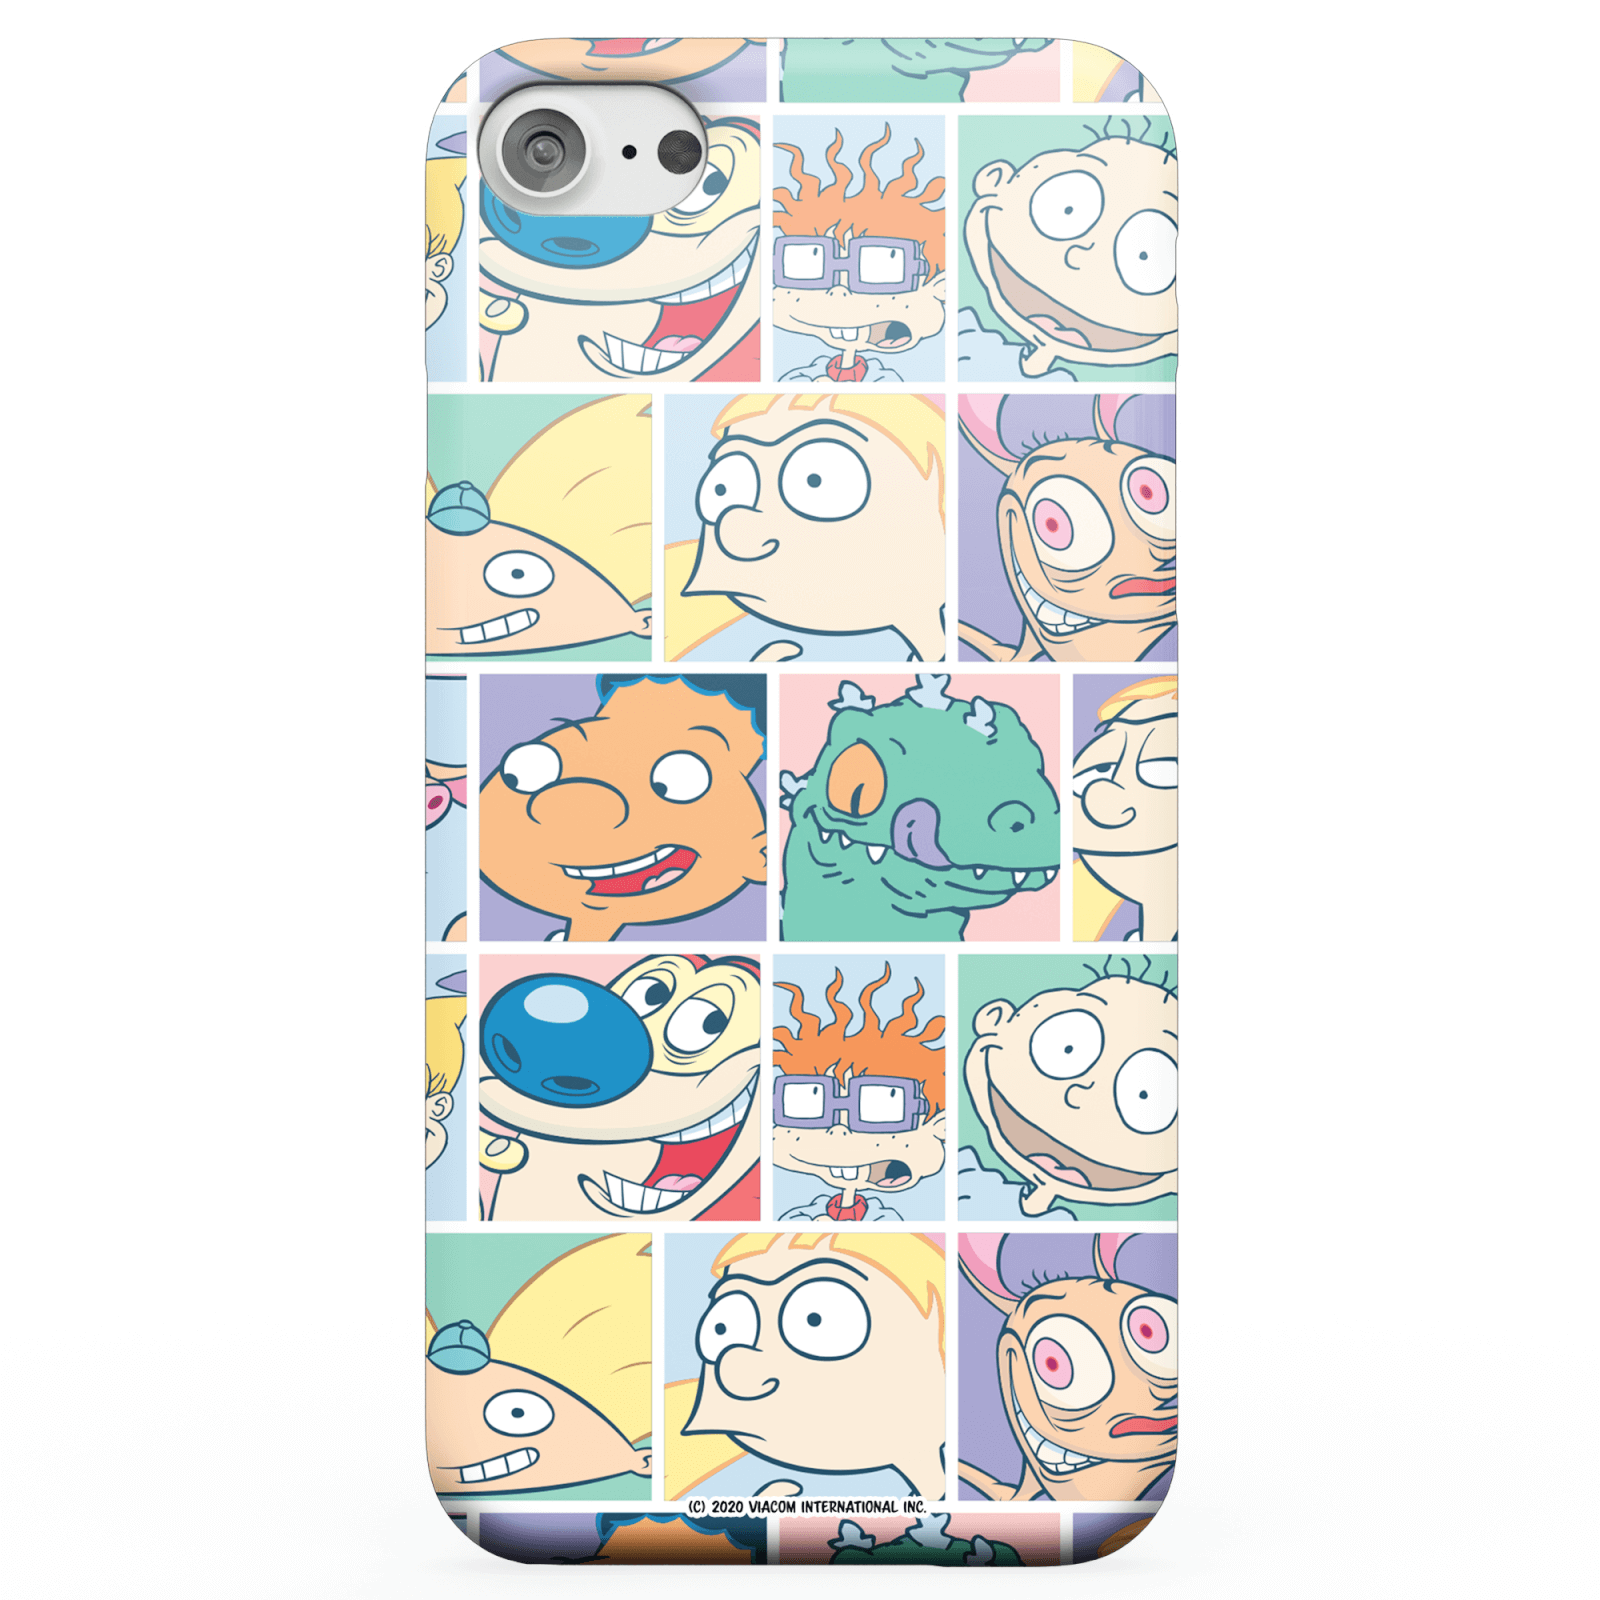 Nickelodeon Cartoon Grid Phone Case for iPhone and Android - iPhone 5C - Snap Case - Matte